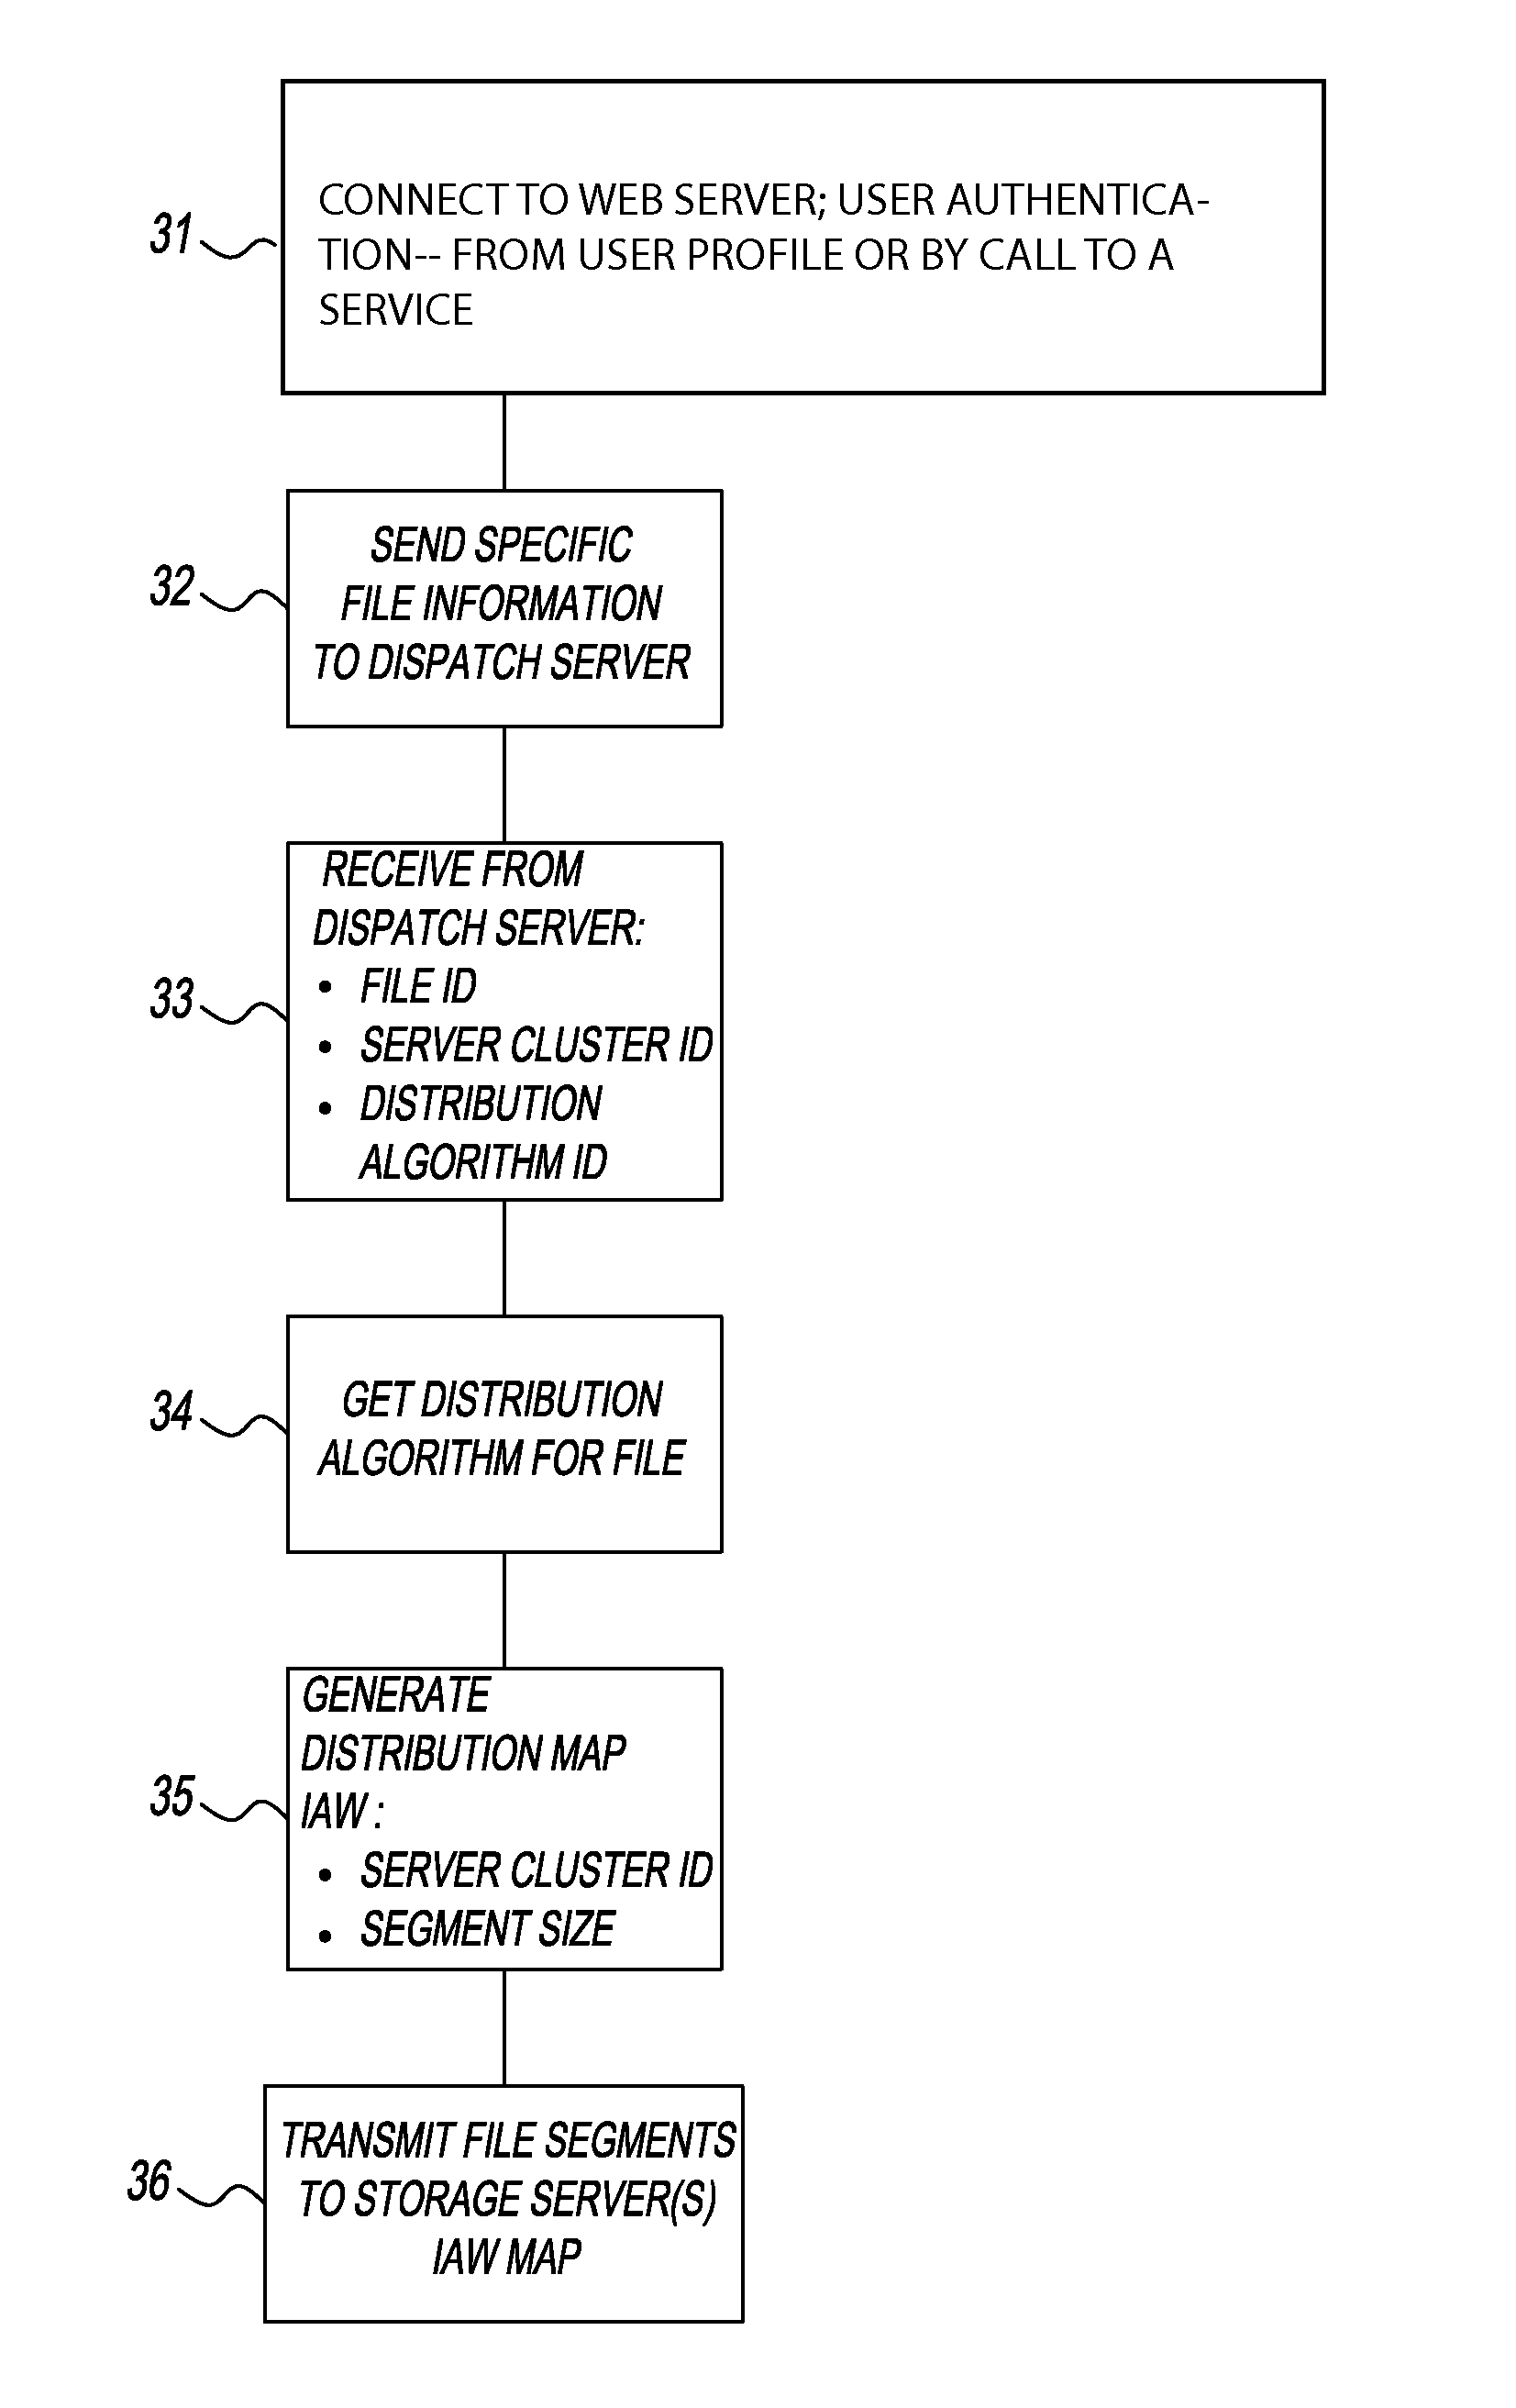 Method For Segmenting A Data File, Storing The File In A Separate Location, And Recreating The File